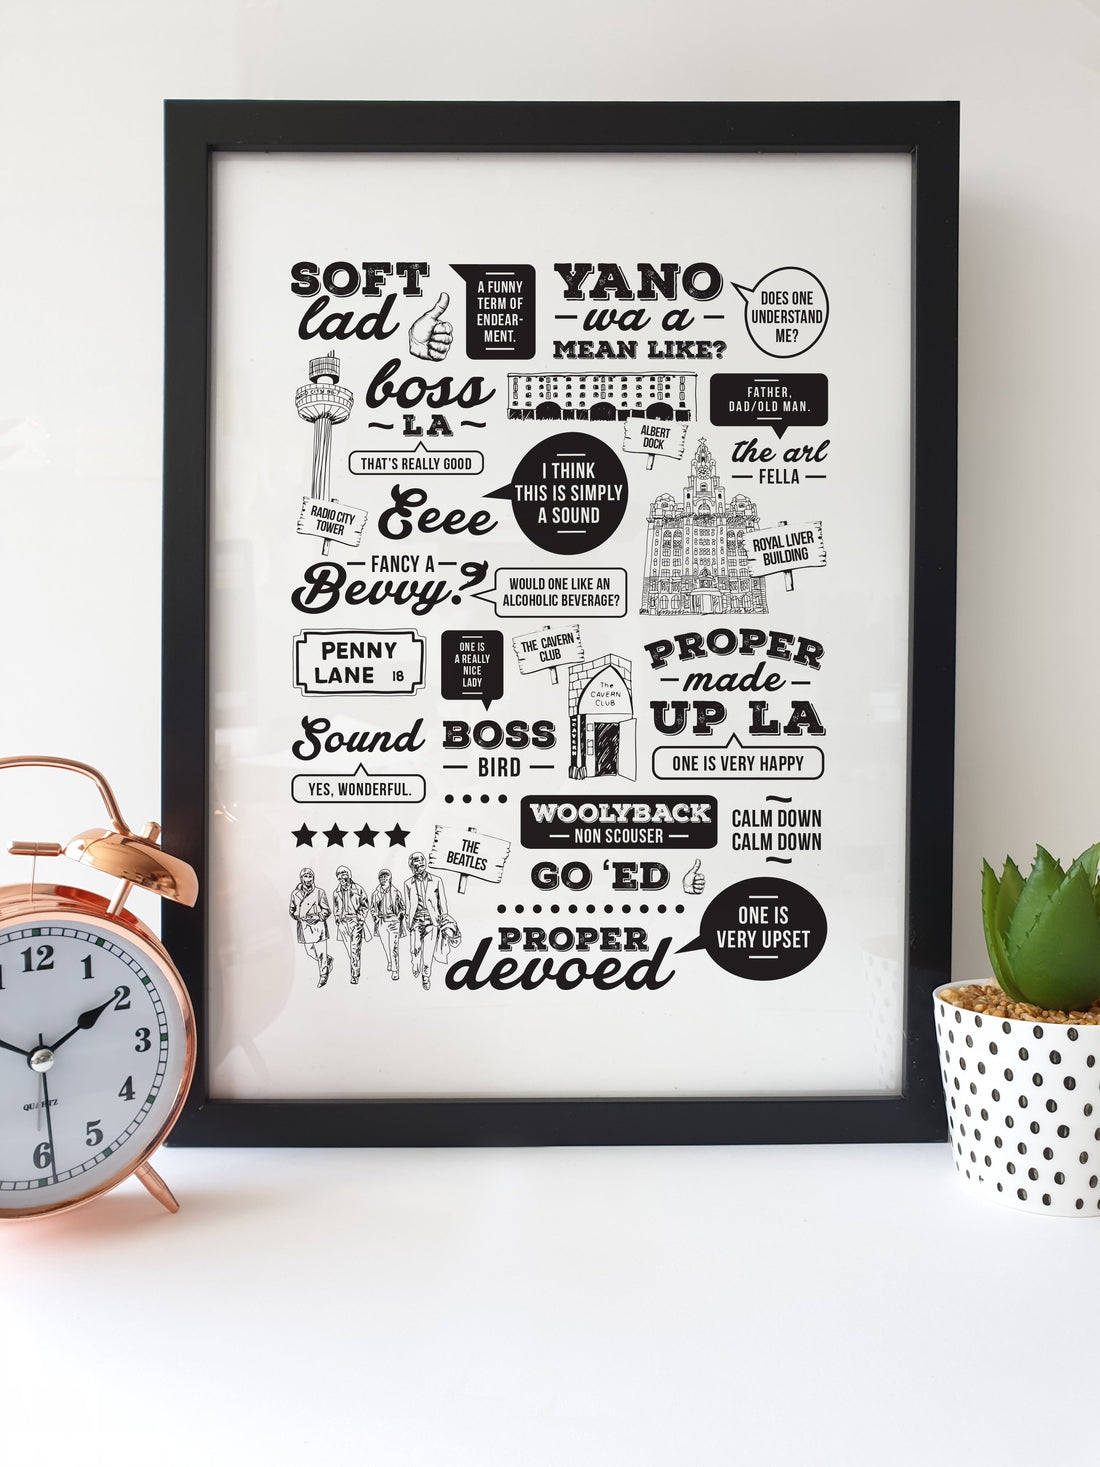 High quality hand drawn illustrated print  Featuring the most popular Scouse sayings, phrases & hand drawn Liverpool landmarks. Translated into hilarious Queens English helping everyone understand the famous Liverpool accent, words & dialect.